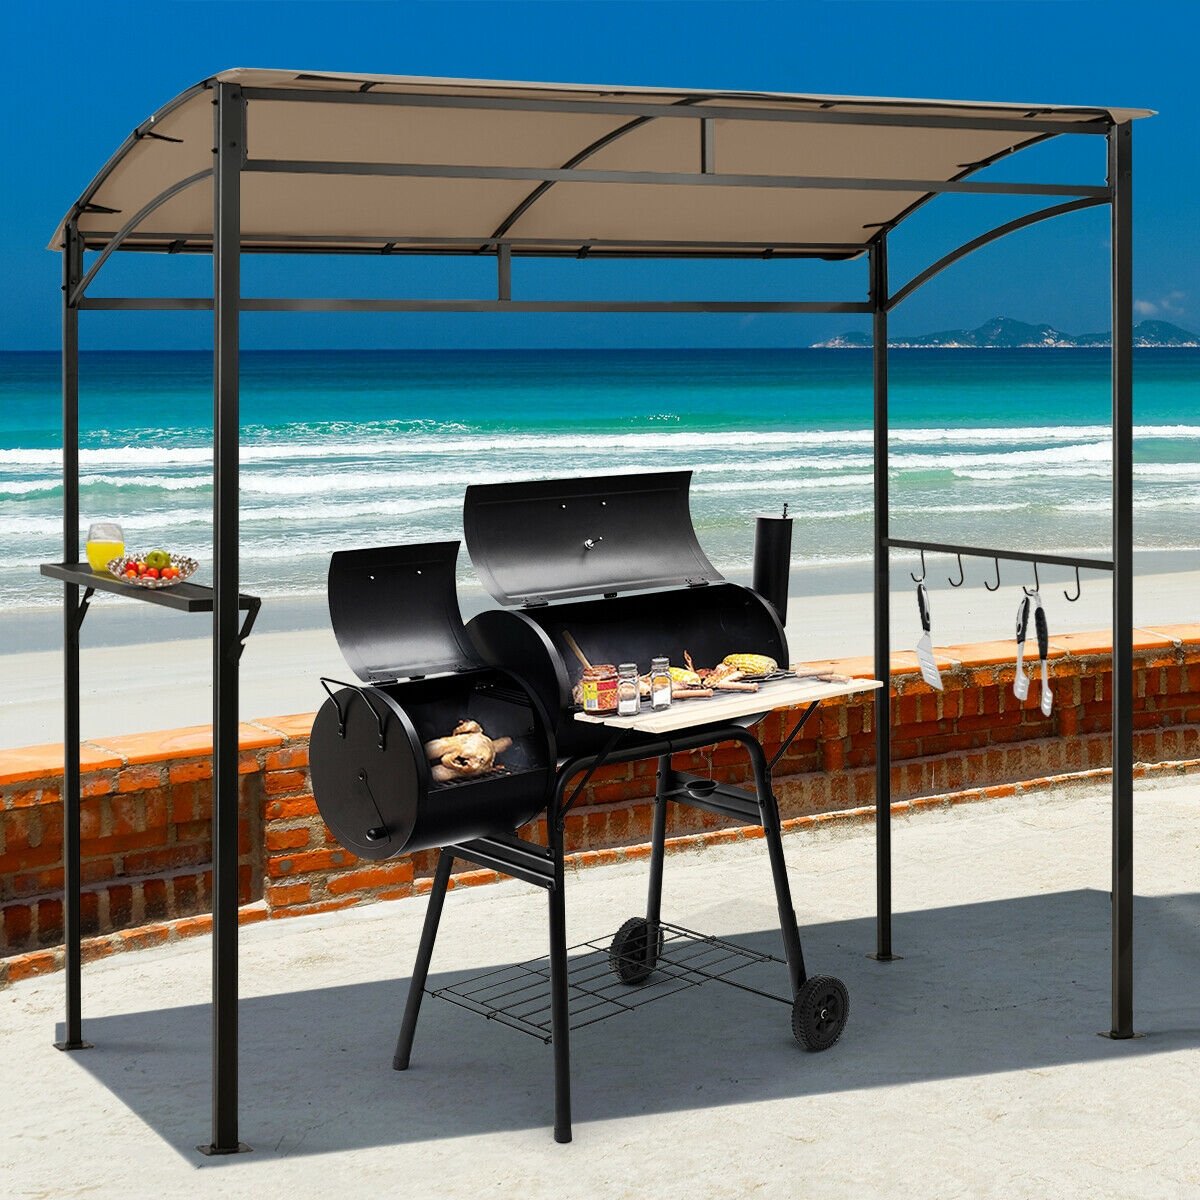 7 x 4.5 Feet Grill Gazebo Outdoor Patio Garden BBQ Canopy Shelter, Brown at Gallery Canada